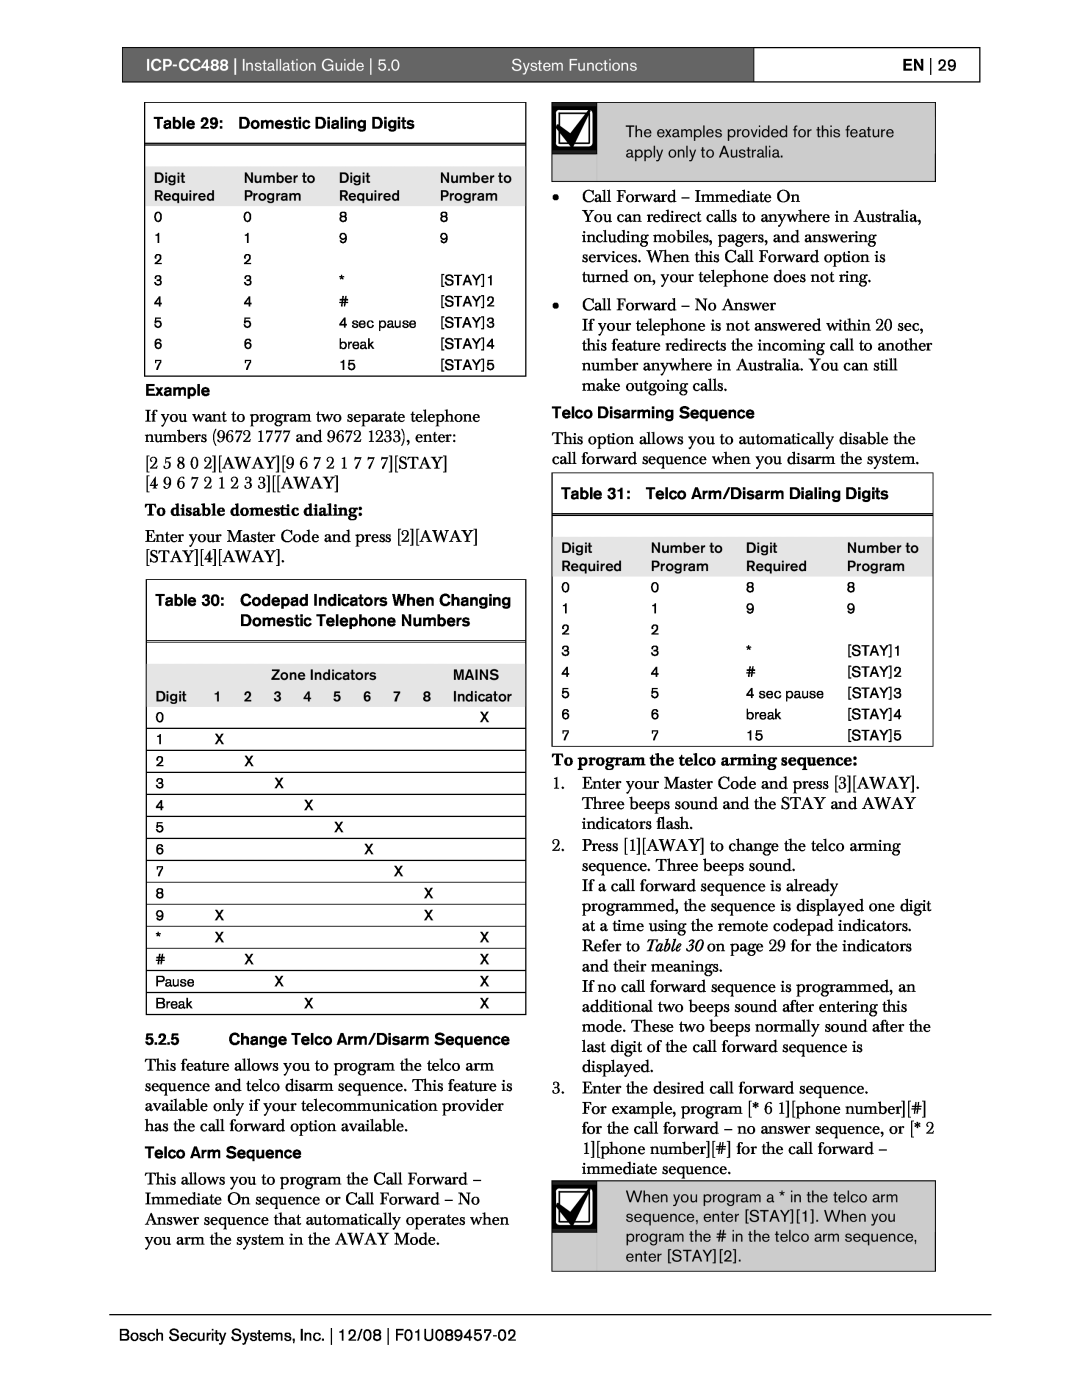 Bosch Appliances manual ICP-CC488| Installation Guide, System Functions, En 